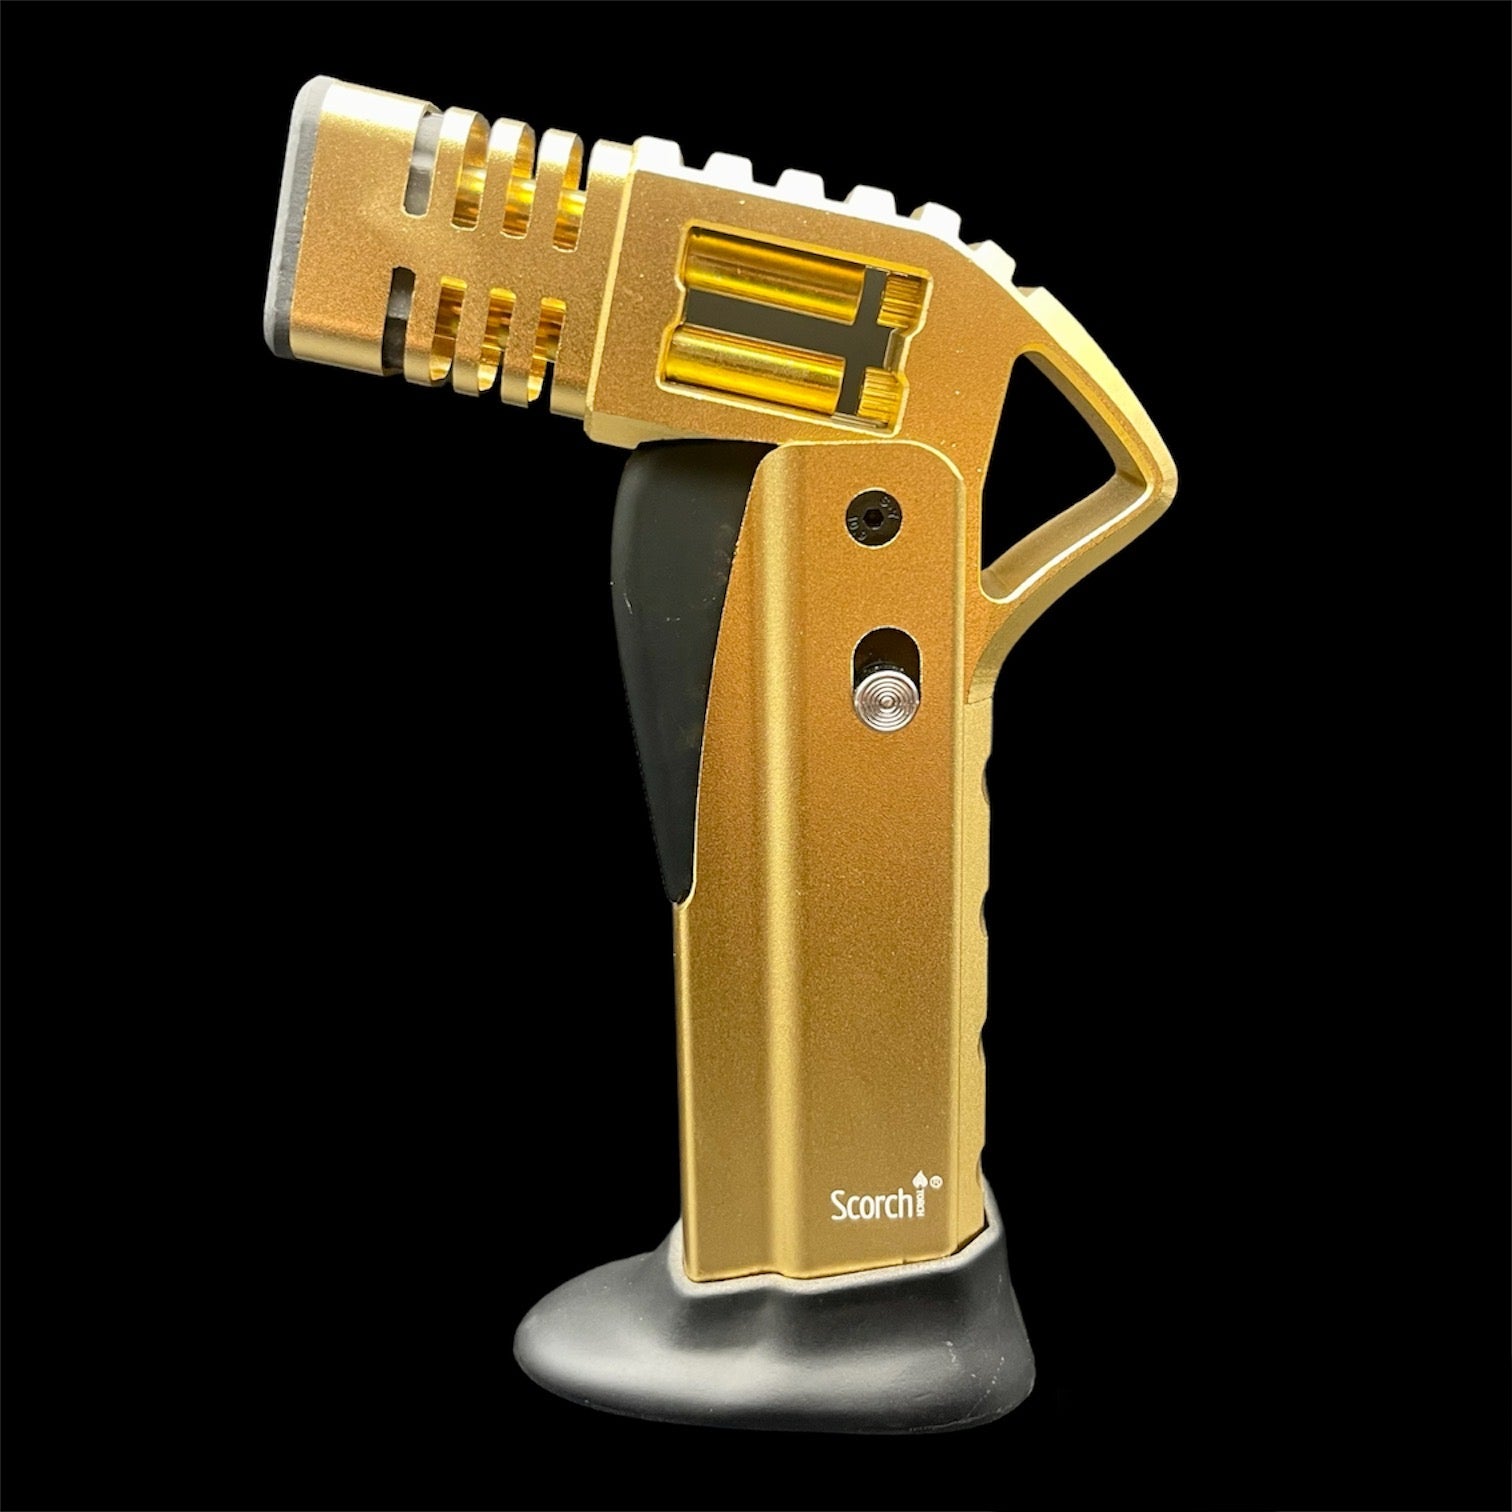 Scorch Torch Lighter 51493 gold color 